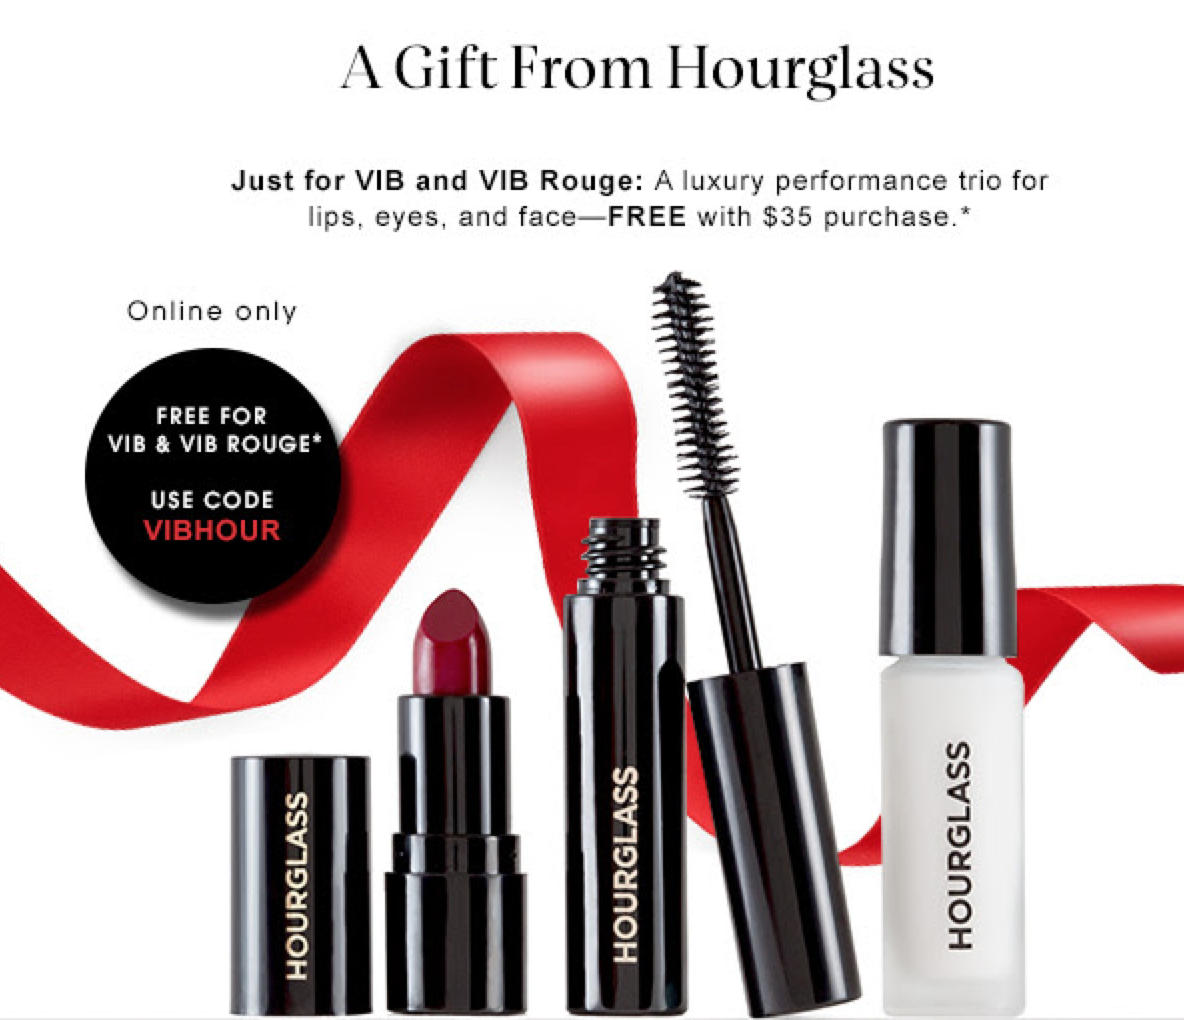 Sephora Hourglass GWP - VIB & VIB Rouge Only